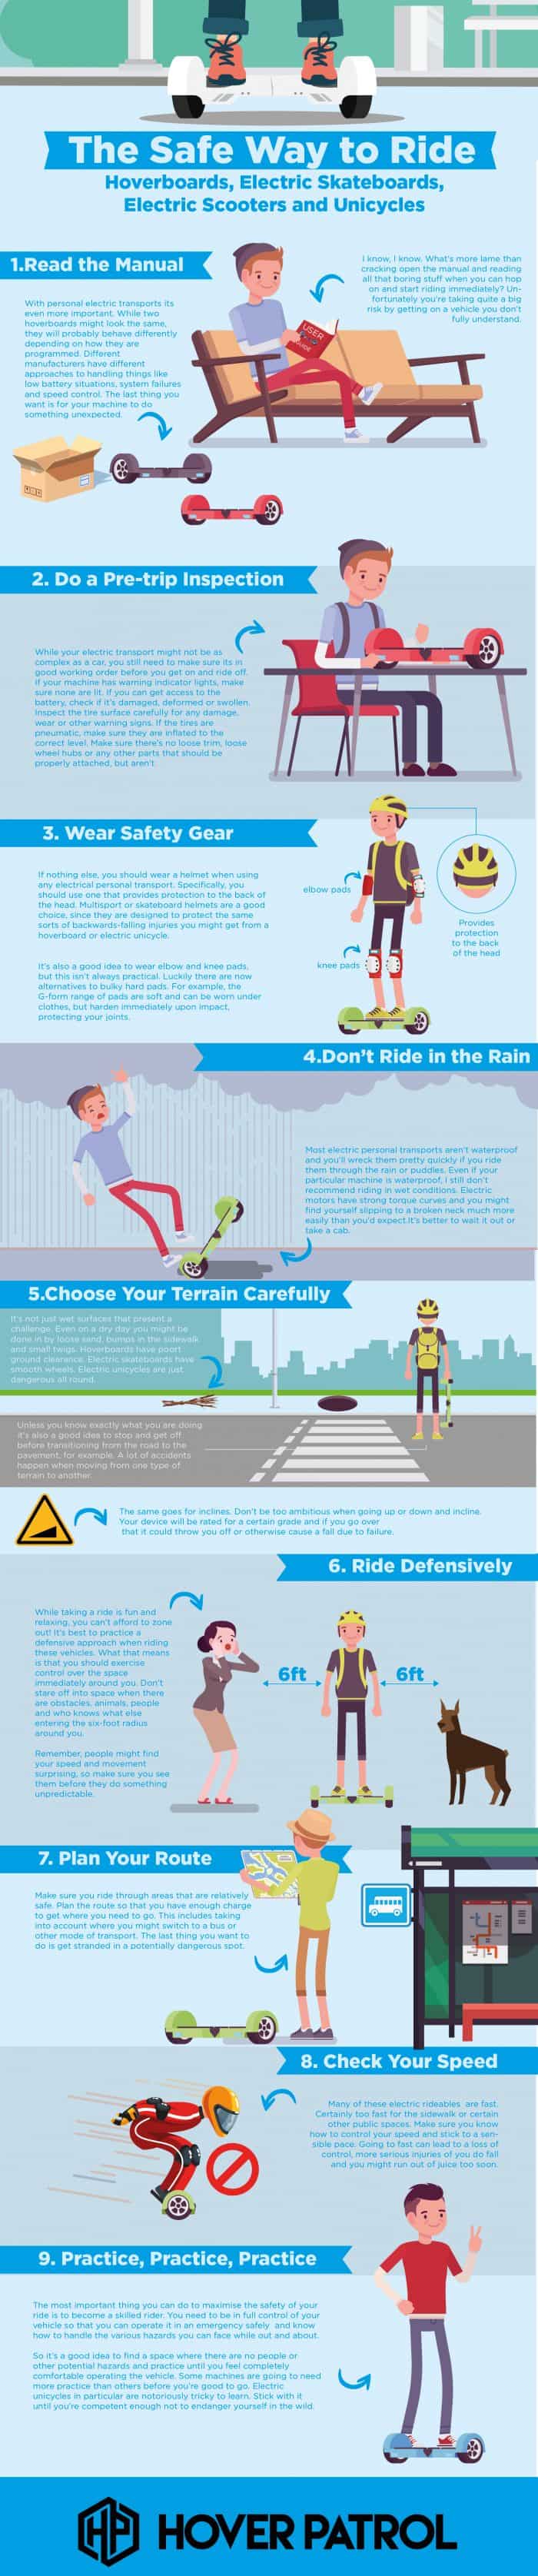 infographic describes safe way to ride hoverboards, electric transport